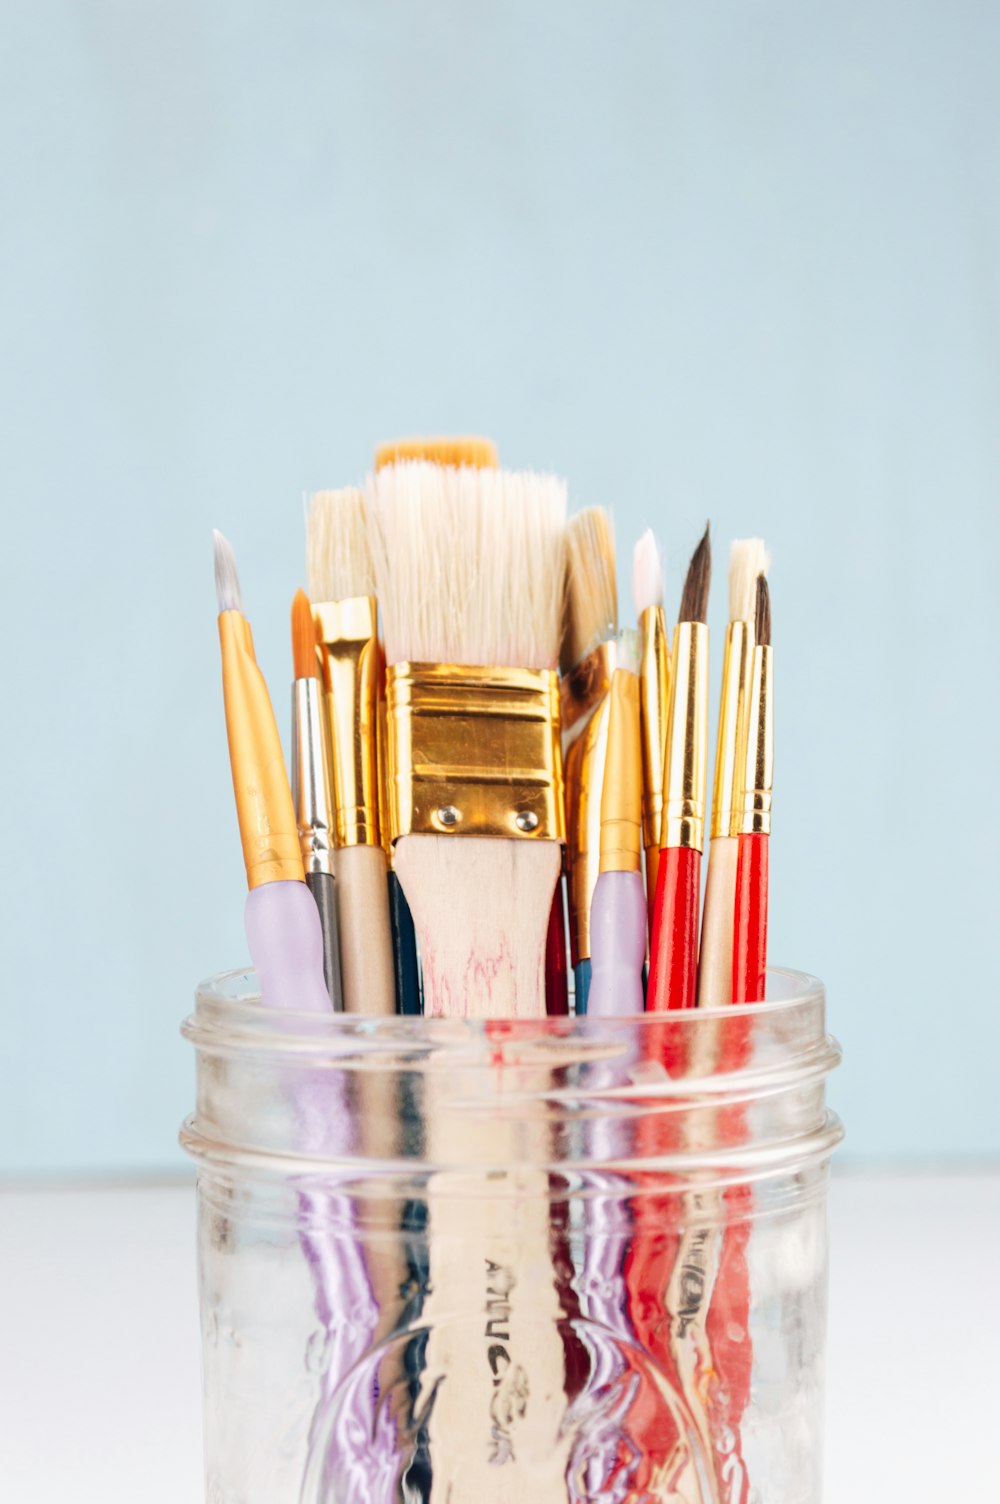 brown and red makeup brushes in clear glass jar